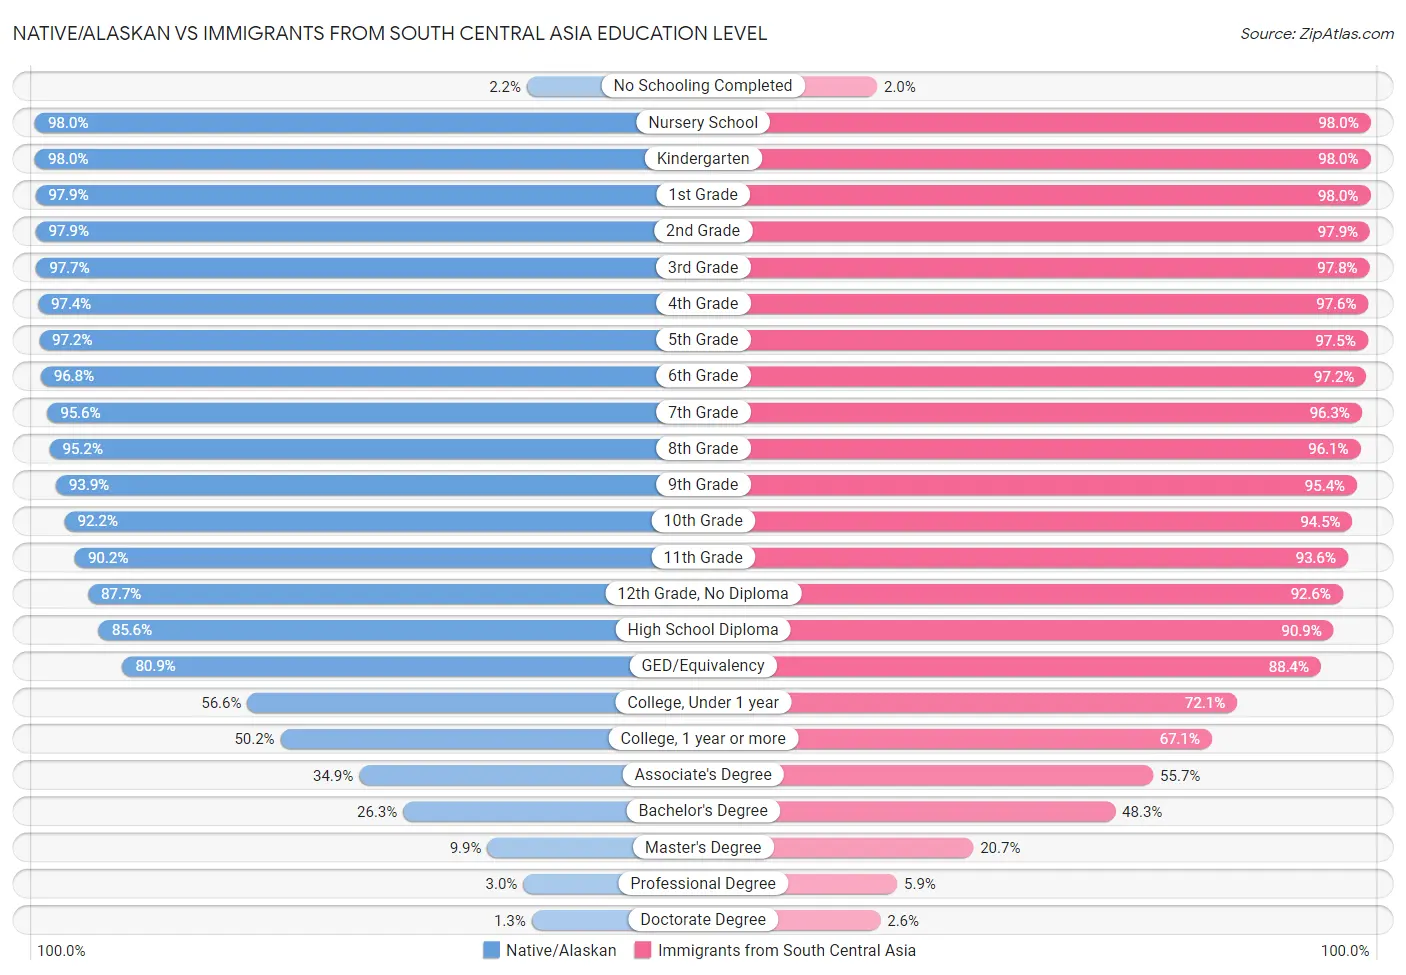 Native/Alaskan vs Immigrants from South Central Asia Education Level